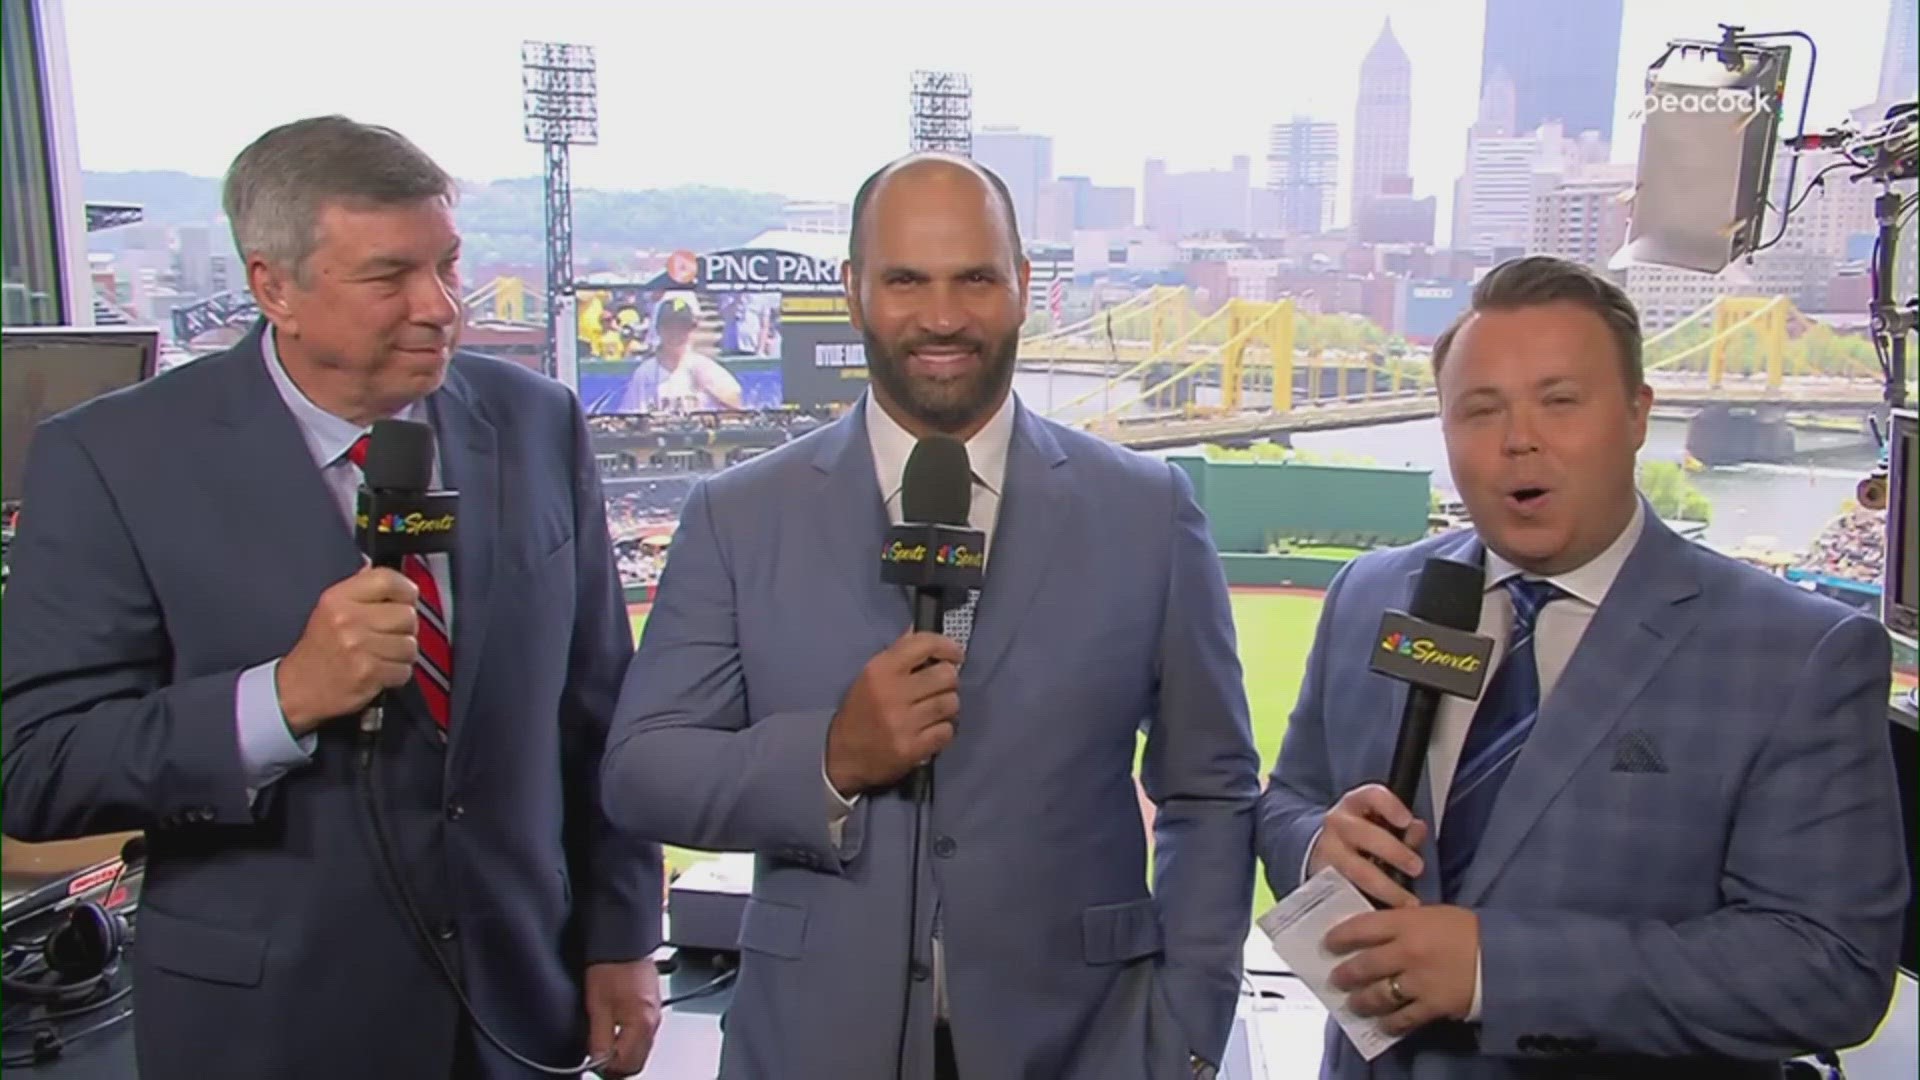 As part of the role, Albert Pujols will serve as an MLB Network on-air analyst. The 2022 season was the last of Pujols' 22-year Major League career.